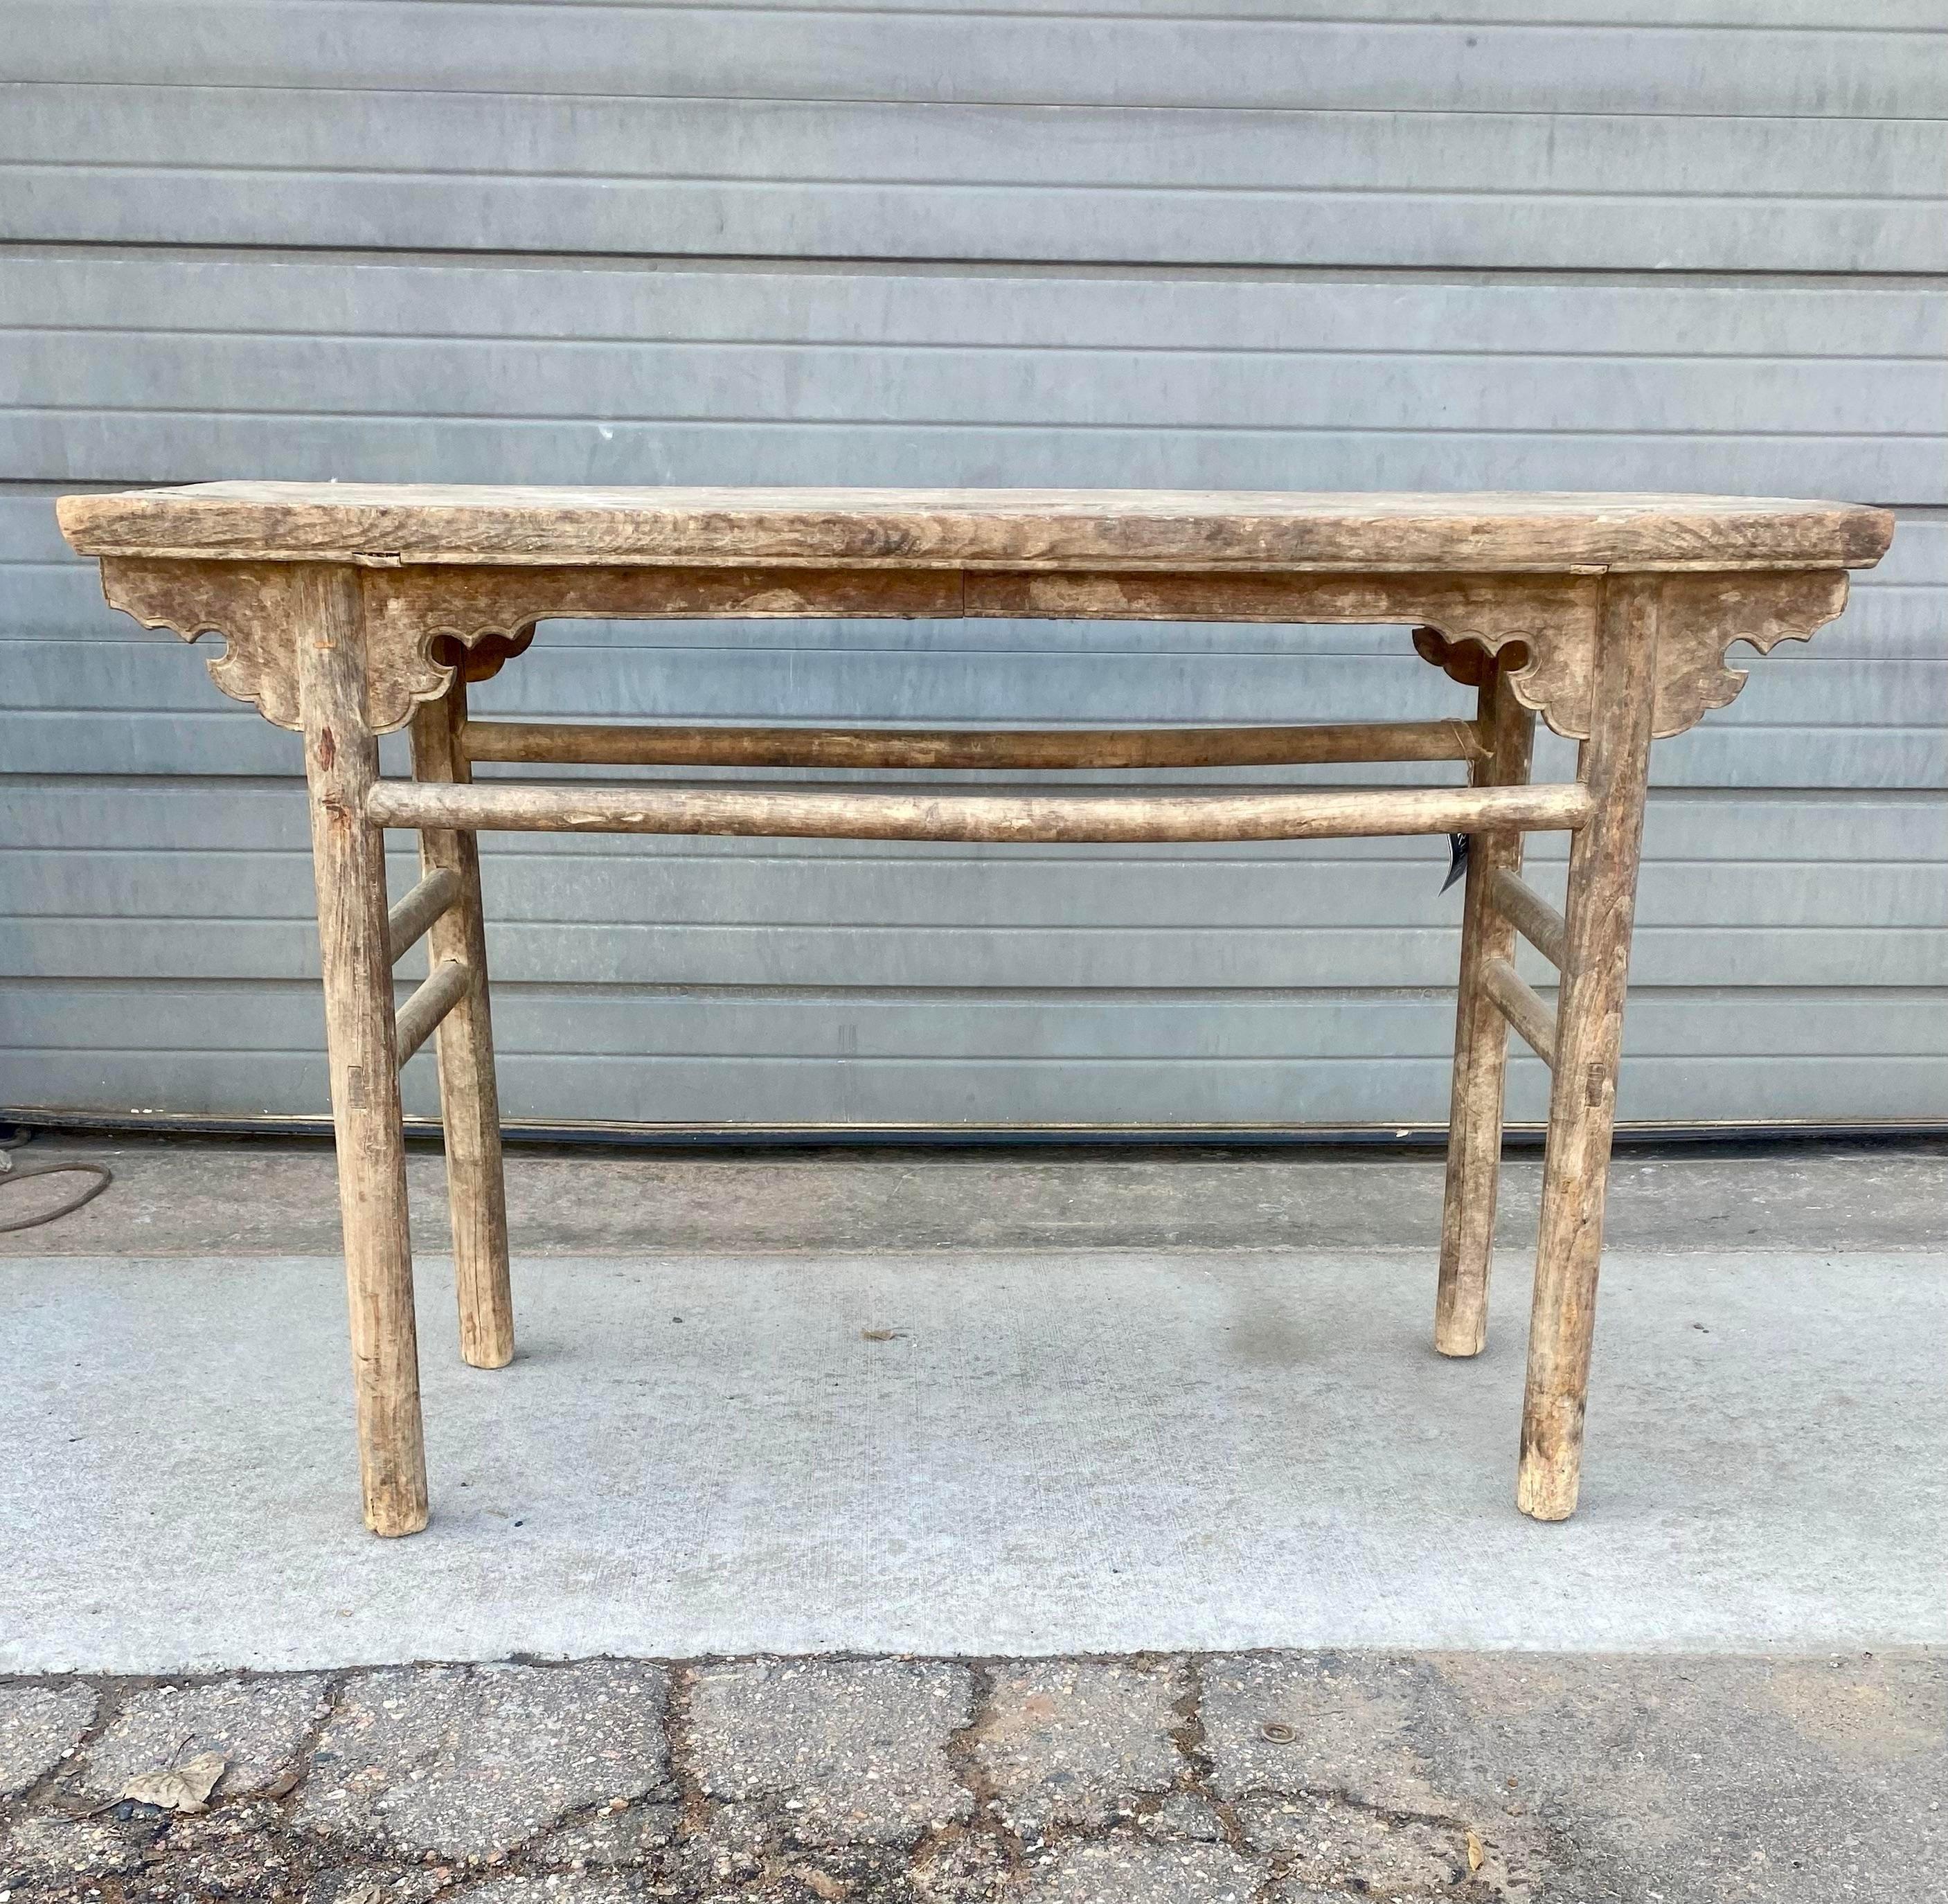 Rustic Asian table with aged raised graining which adds texture to the rustic appearance. Traditional form with upraised ends, ‘cloud’ motif scrolled decoration to the aprons on either side. Great for entry, side table or bathroom